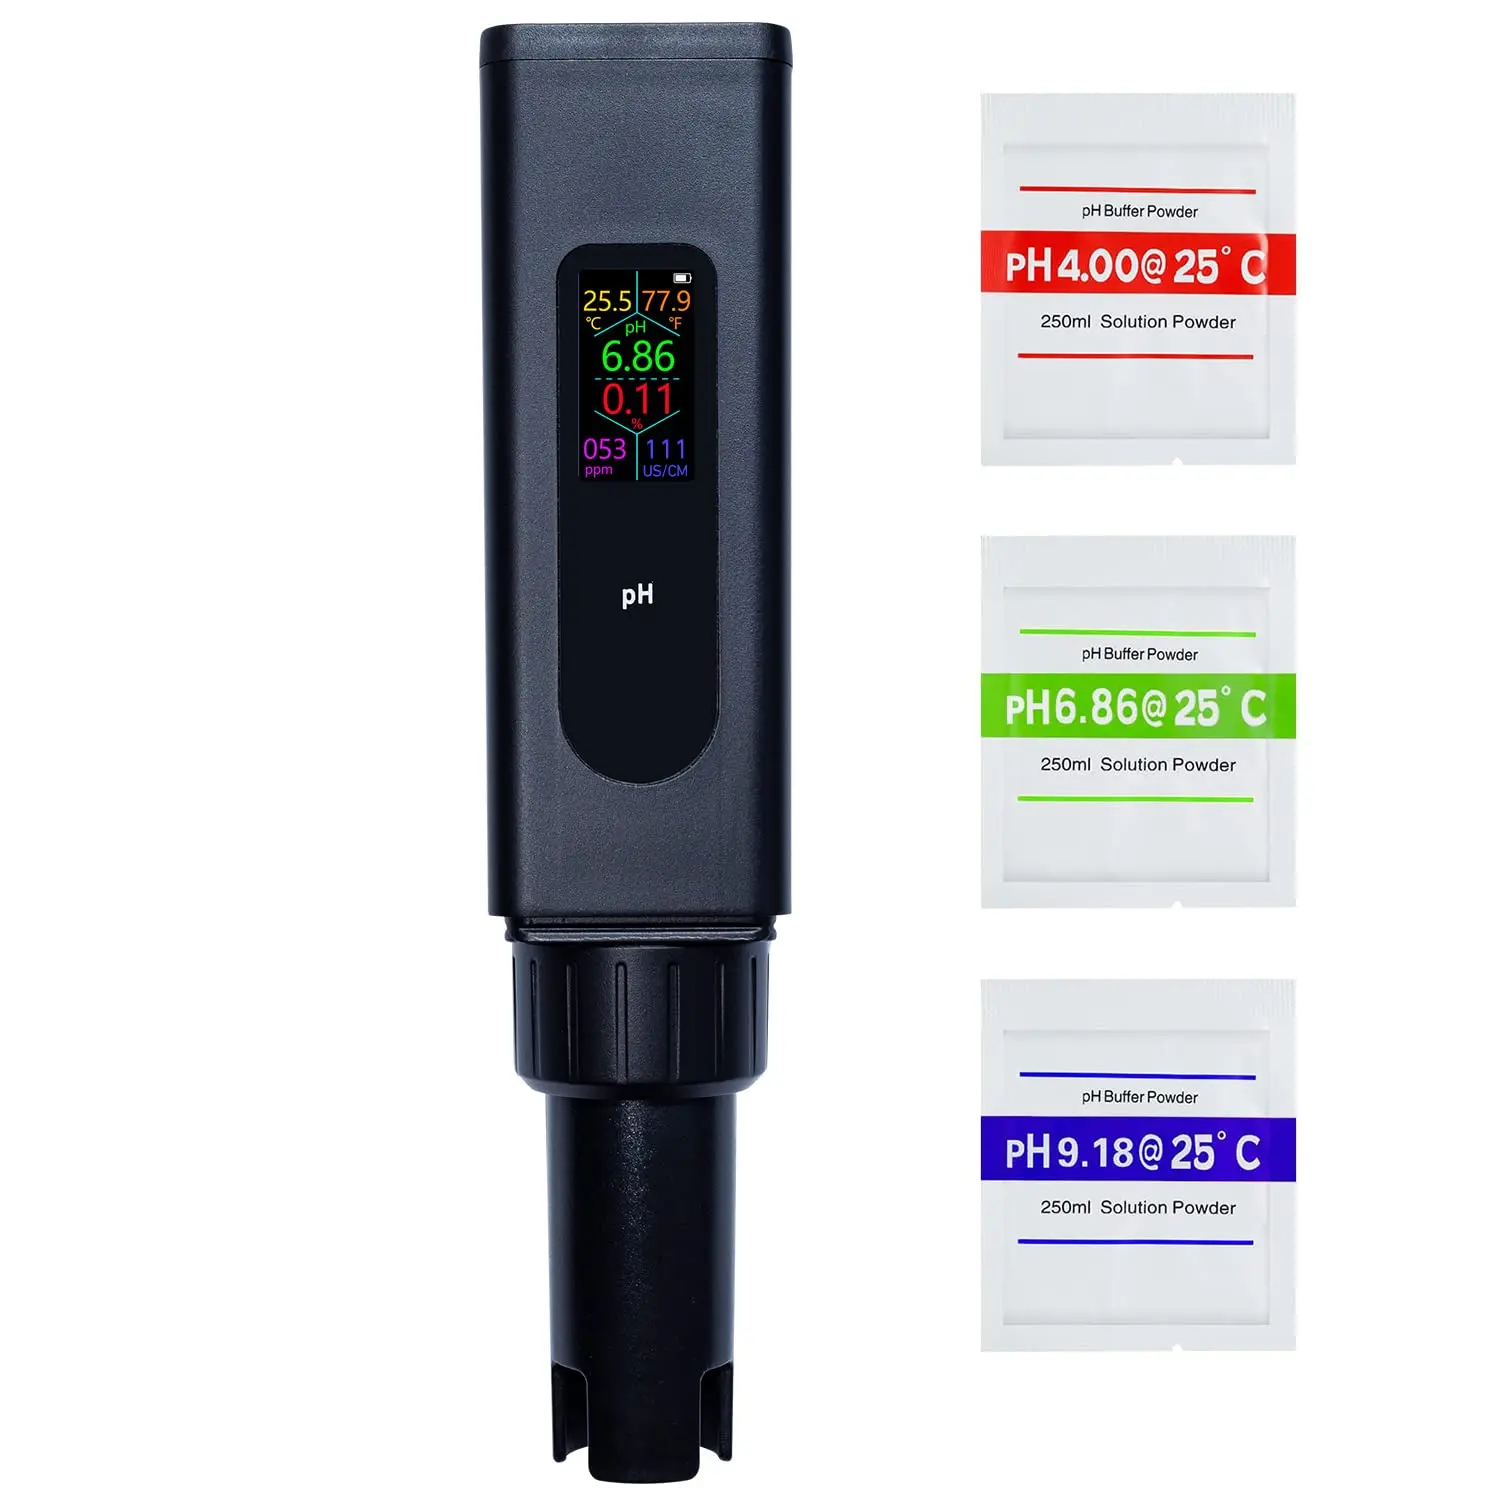 

Rechargeable Digital pH Meter 5-in-1 pH/TDS/EC/Salinity/Temp, with Simultaneous Data Display for Hydroponics, Aquariums, Lab